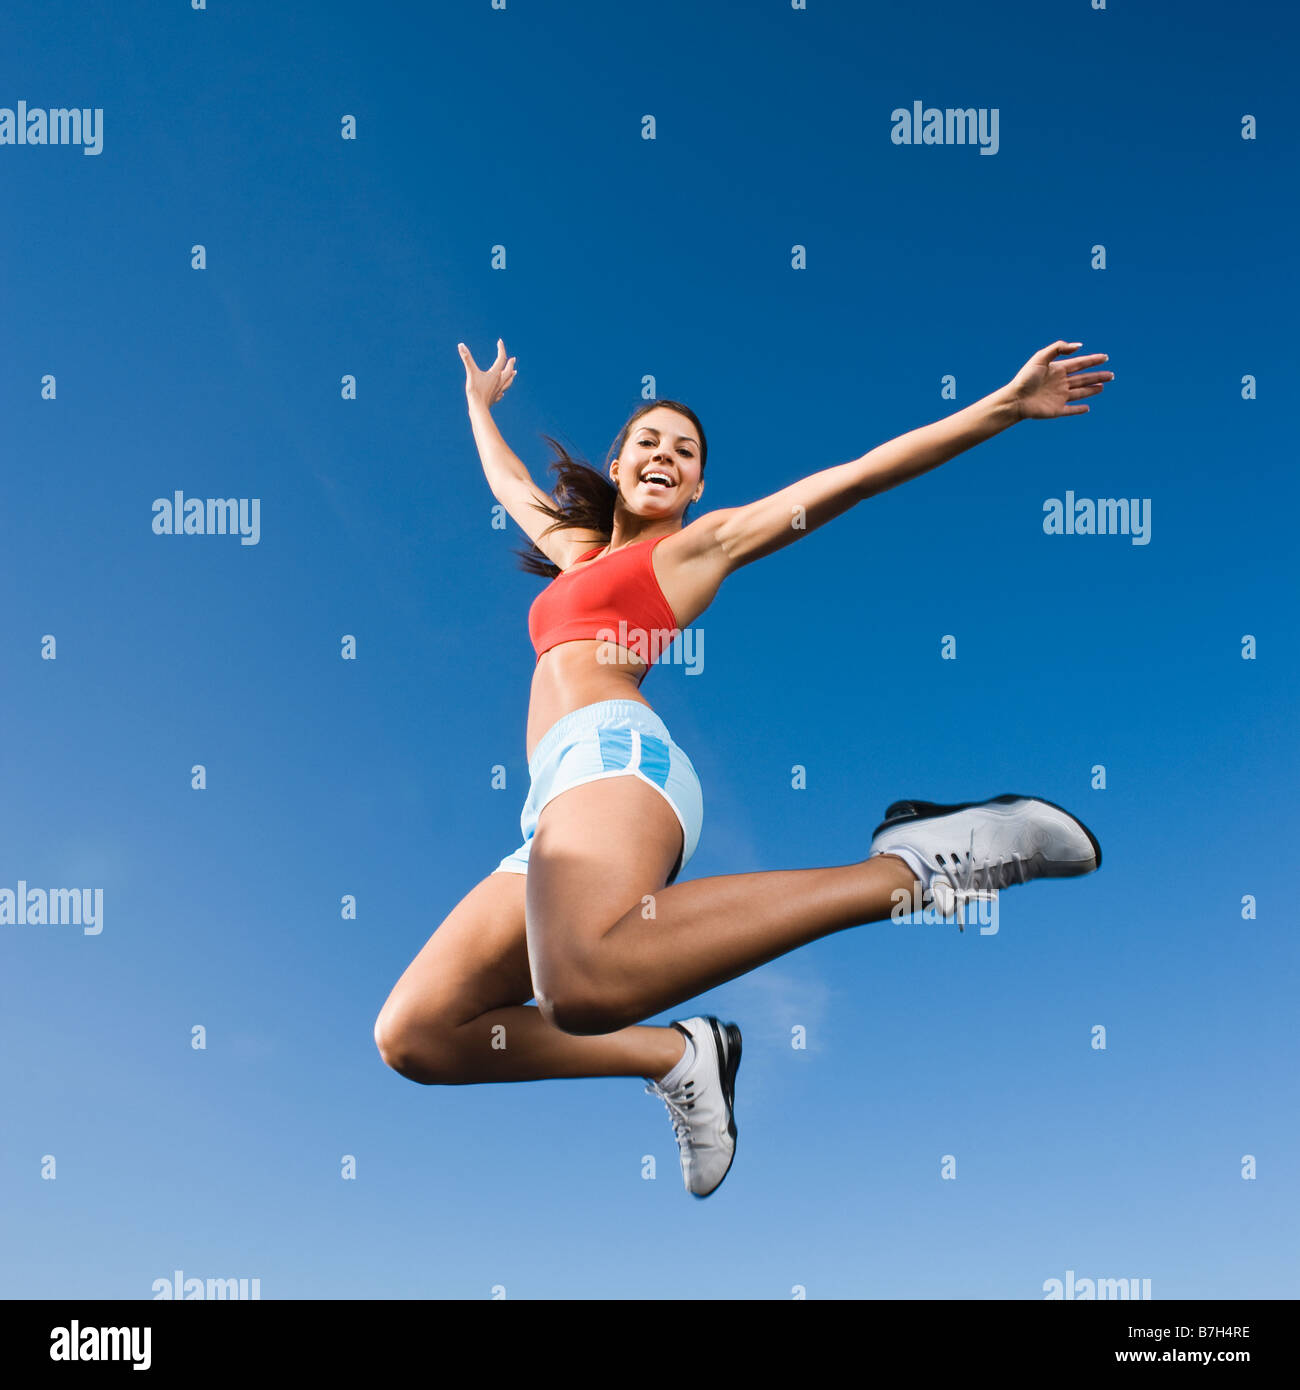 Native American woman jumping in mid-air Stock Photo